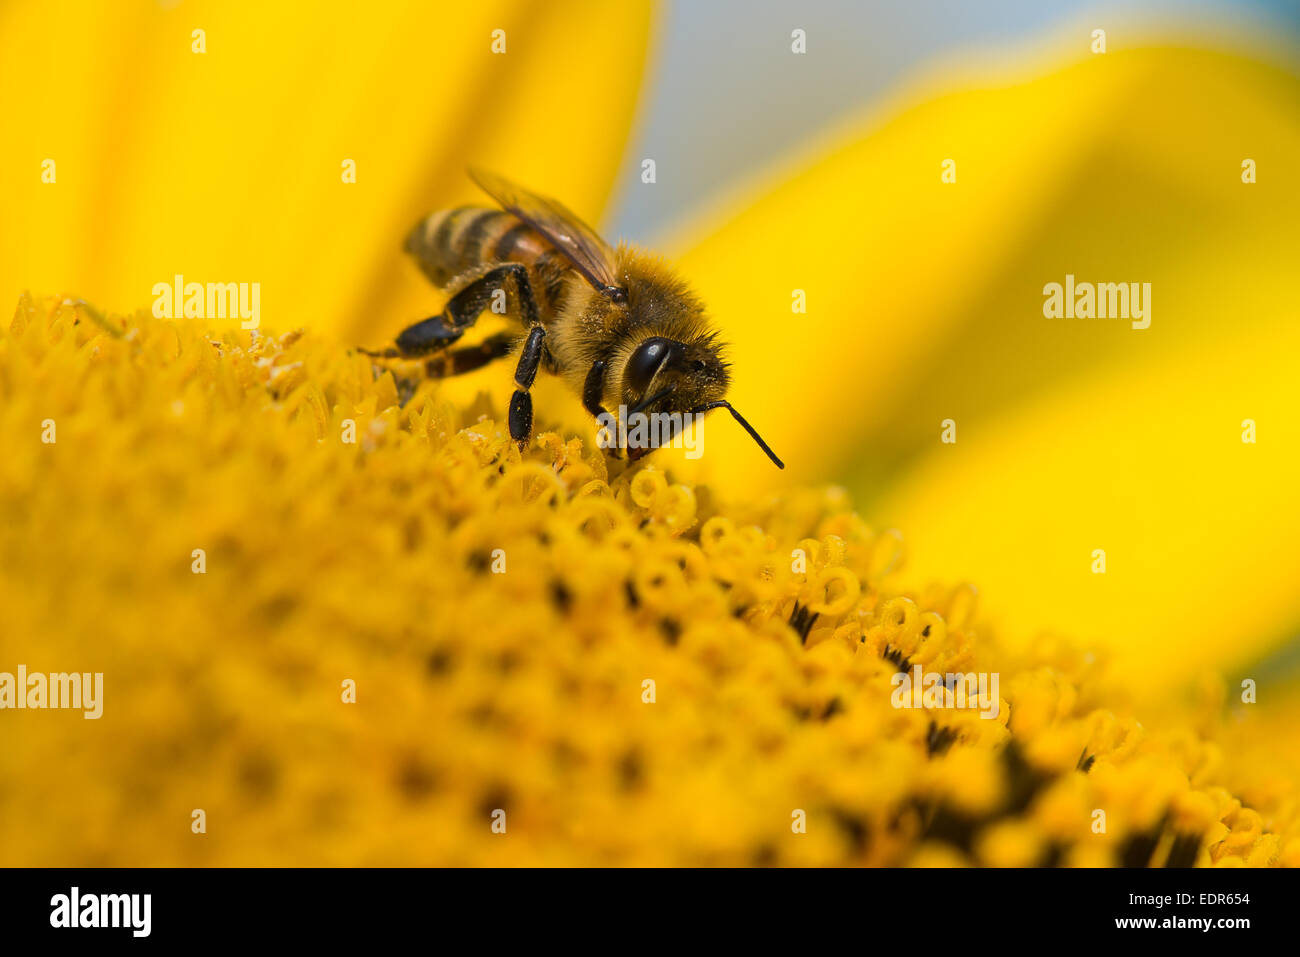 Macro image of a honey bee on a sunflower. Stock Photo